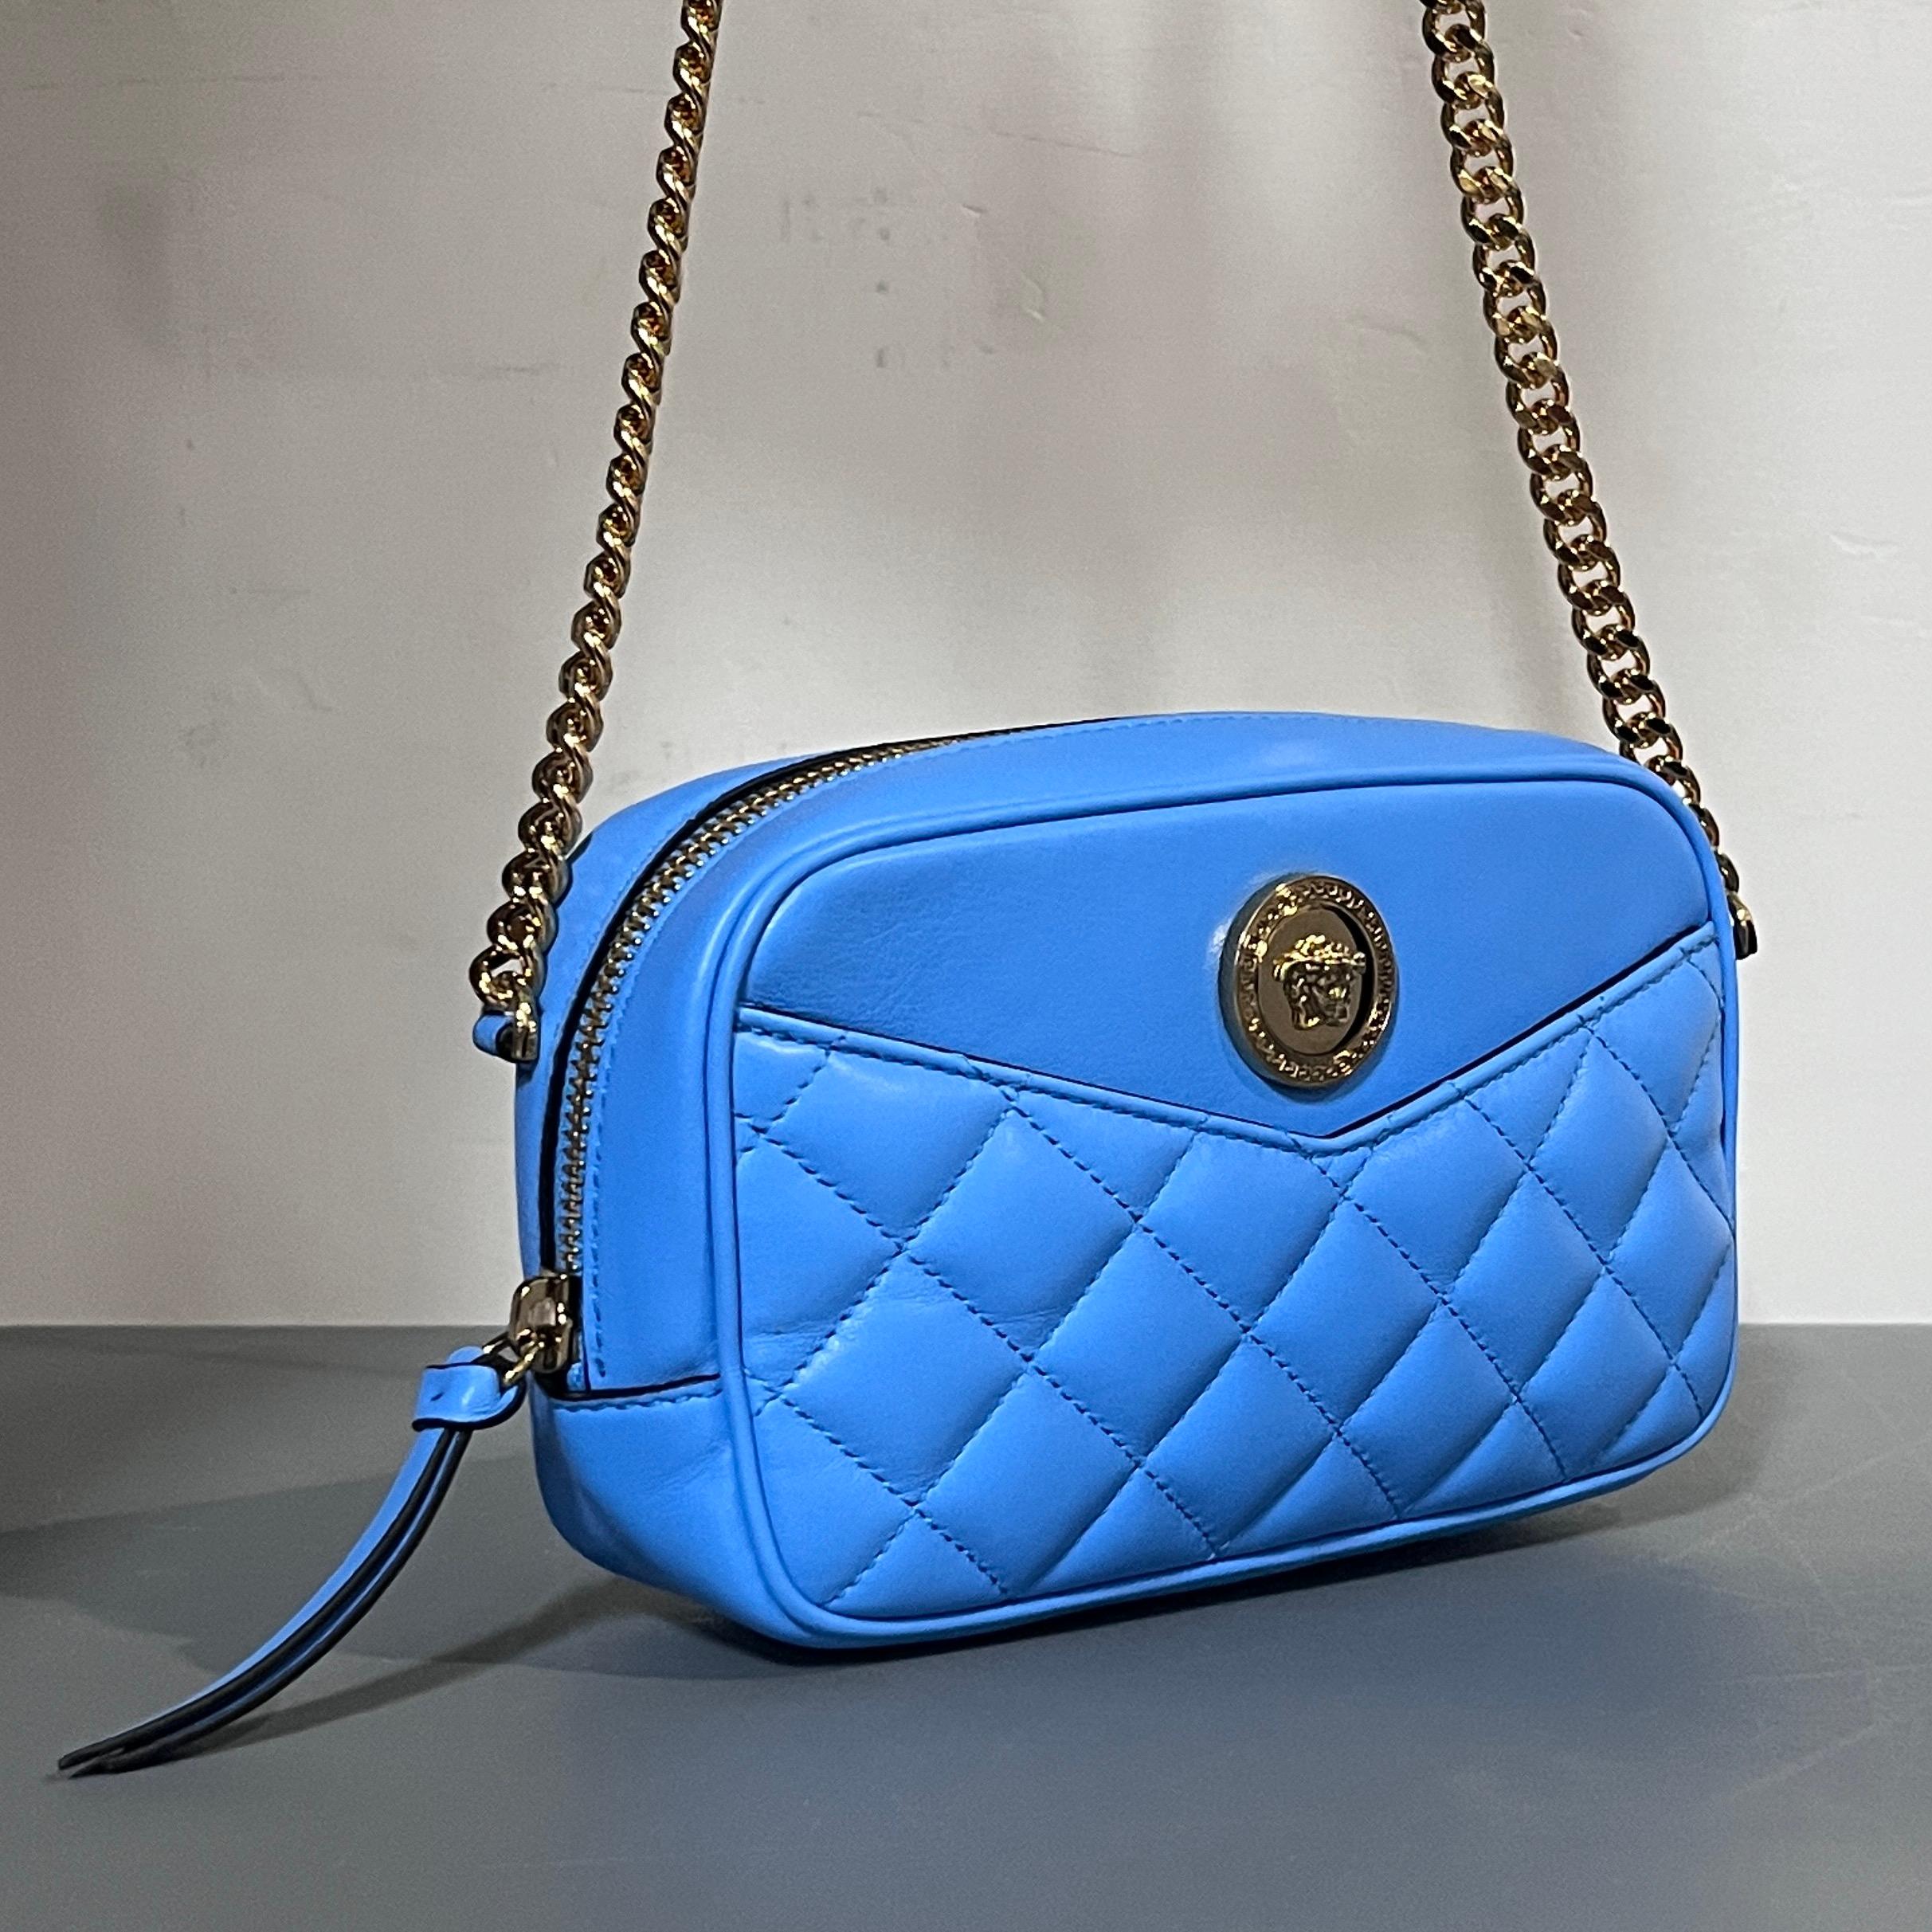 Blue new VERSACE blue lambskin leather quilted gold Medusa chain crossbody bag Small